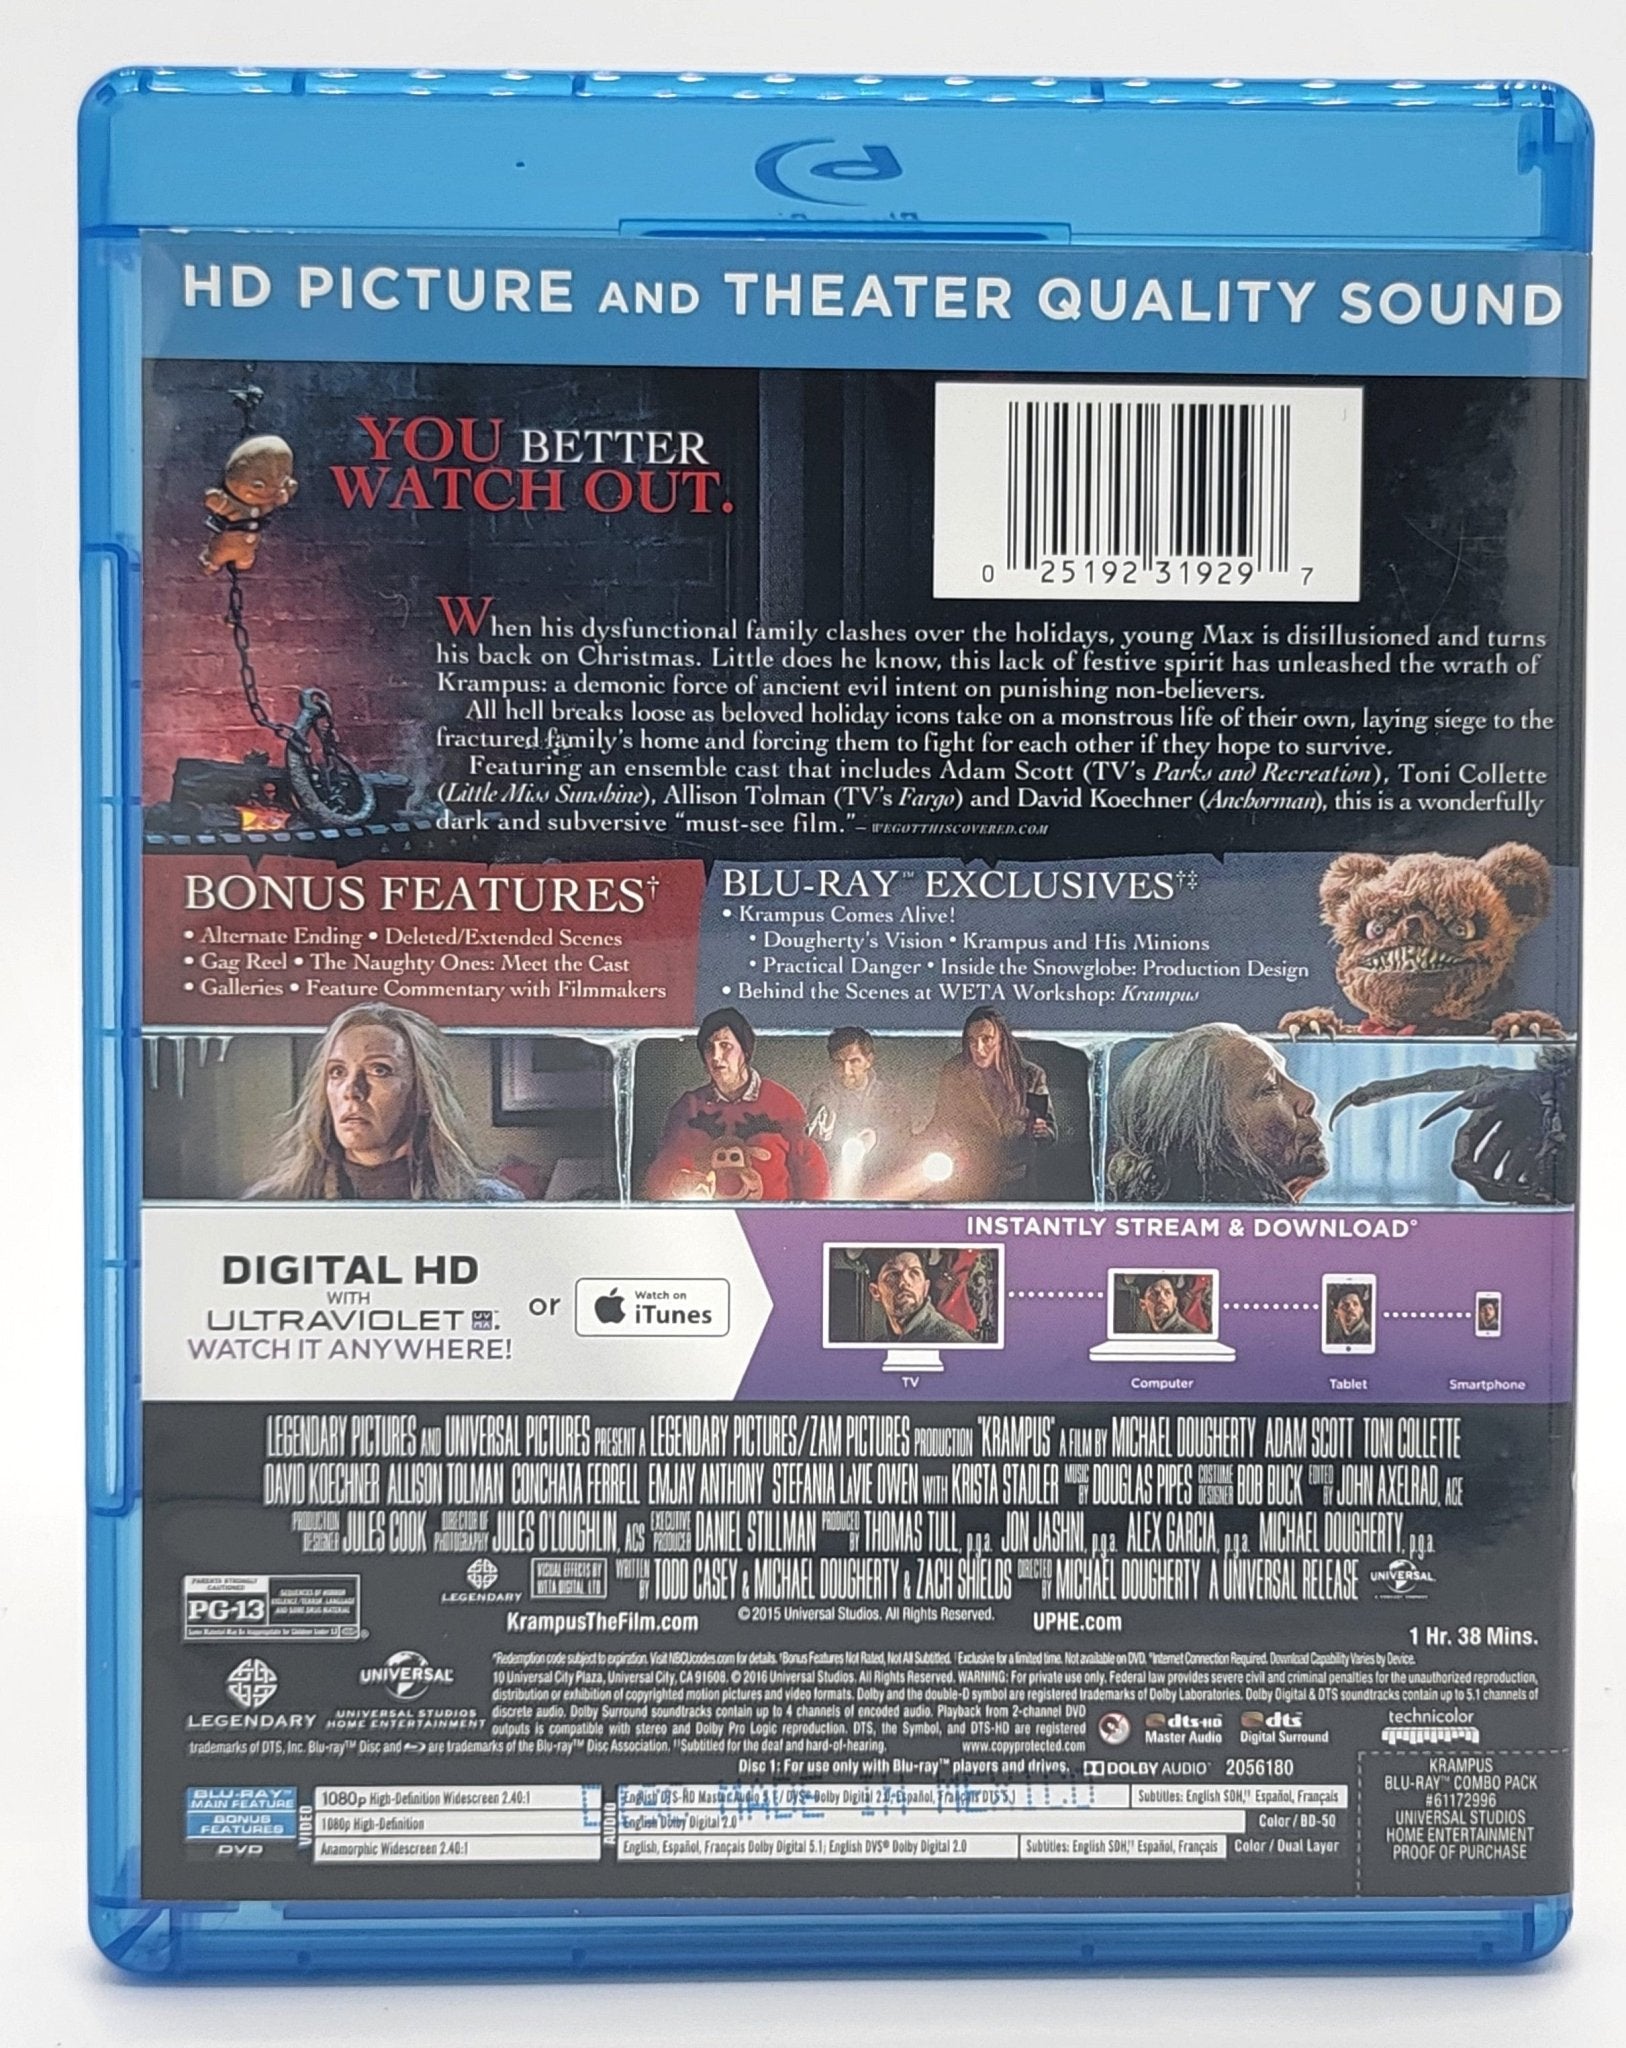 Universal Pictures Home Entertainment - Krampus | Blu Ray - DVD - No Digital Copy - DVD & Blu-ray - Steady Bunny Shop